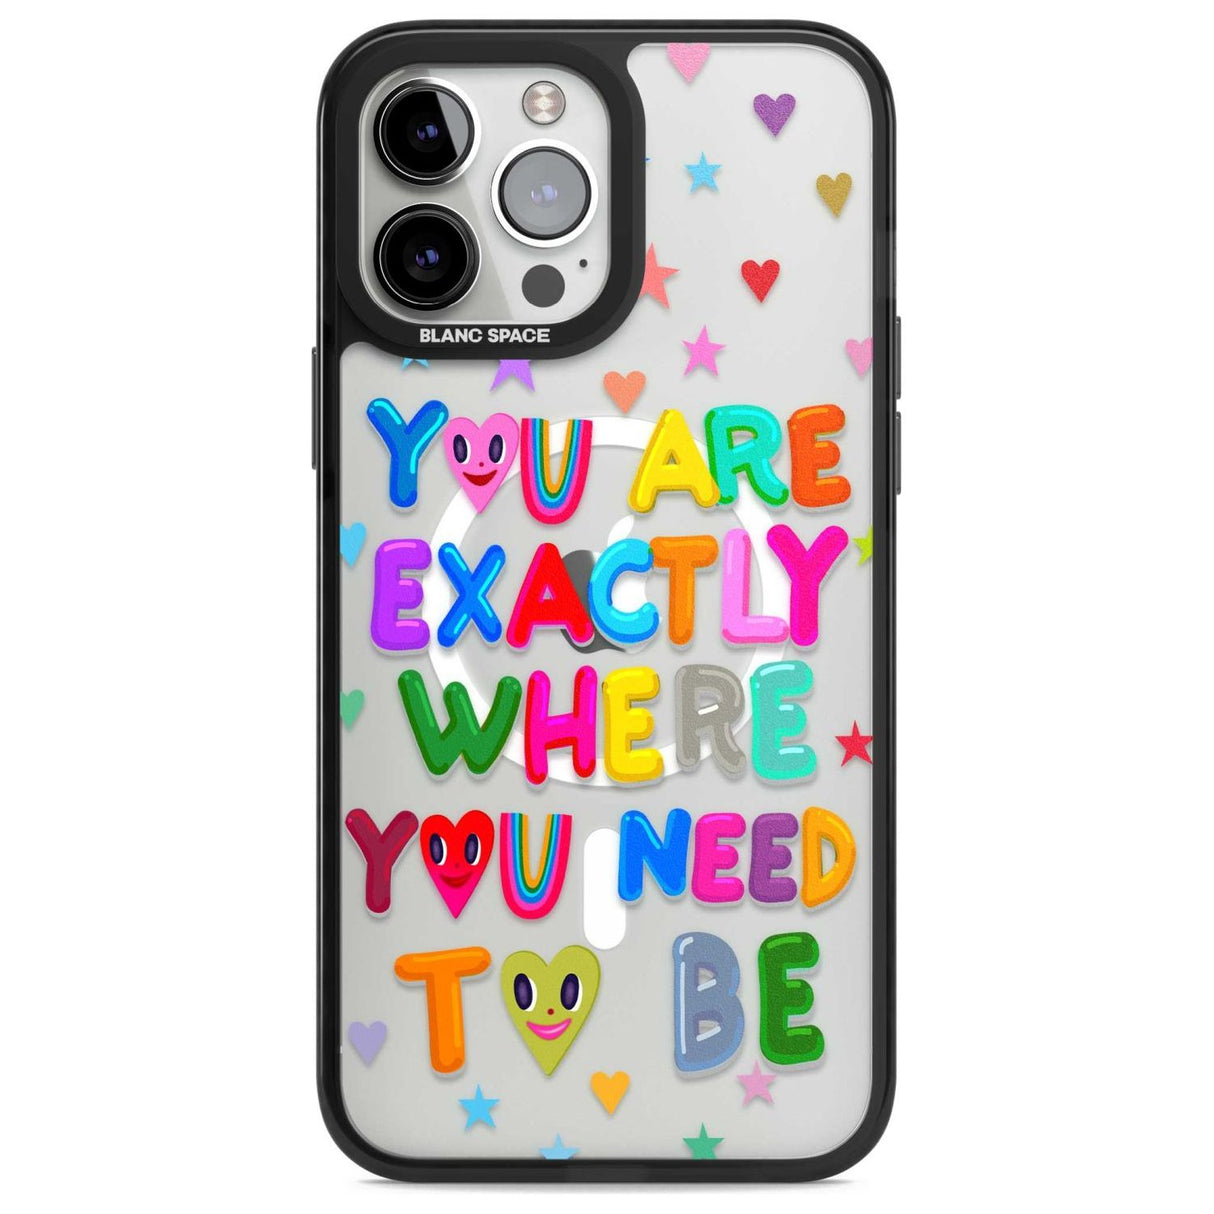 Exactly Where You Need To be Phone Case iPhone 13 Pro Max / Magsafe Black Impact Case Blanc Space